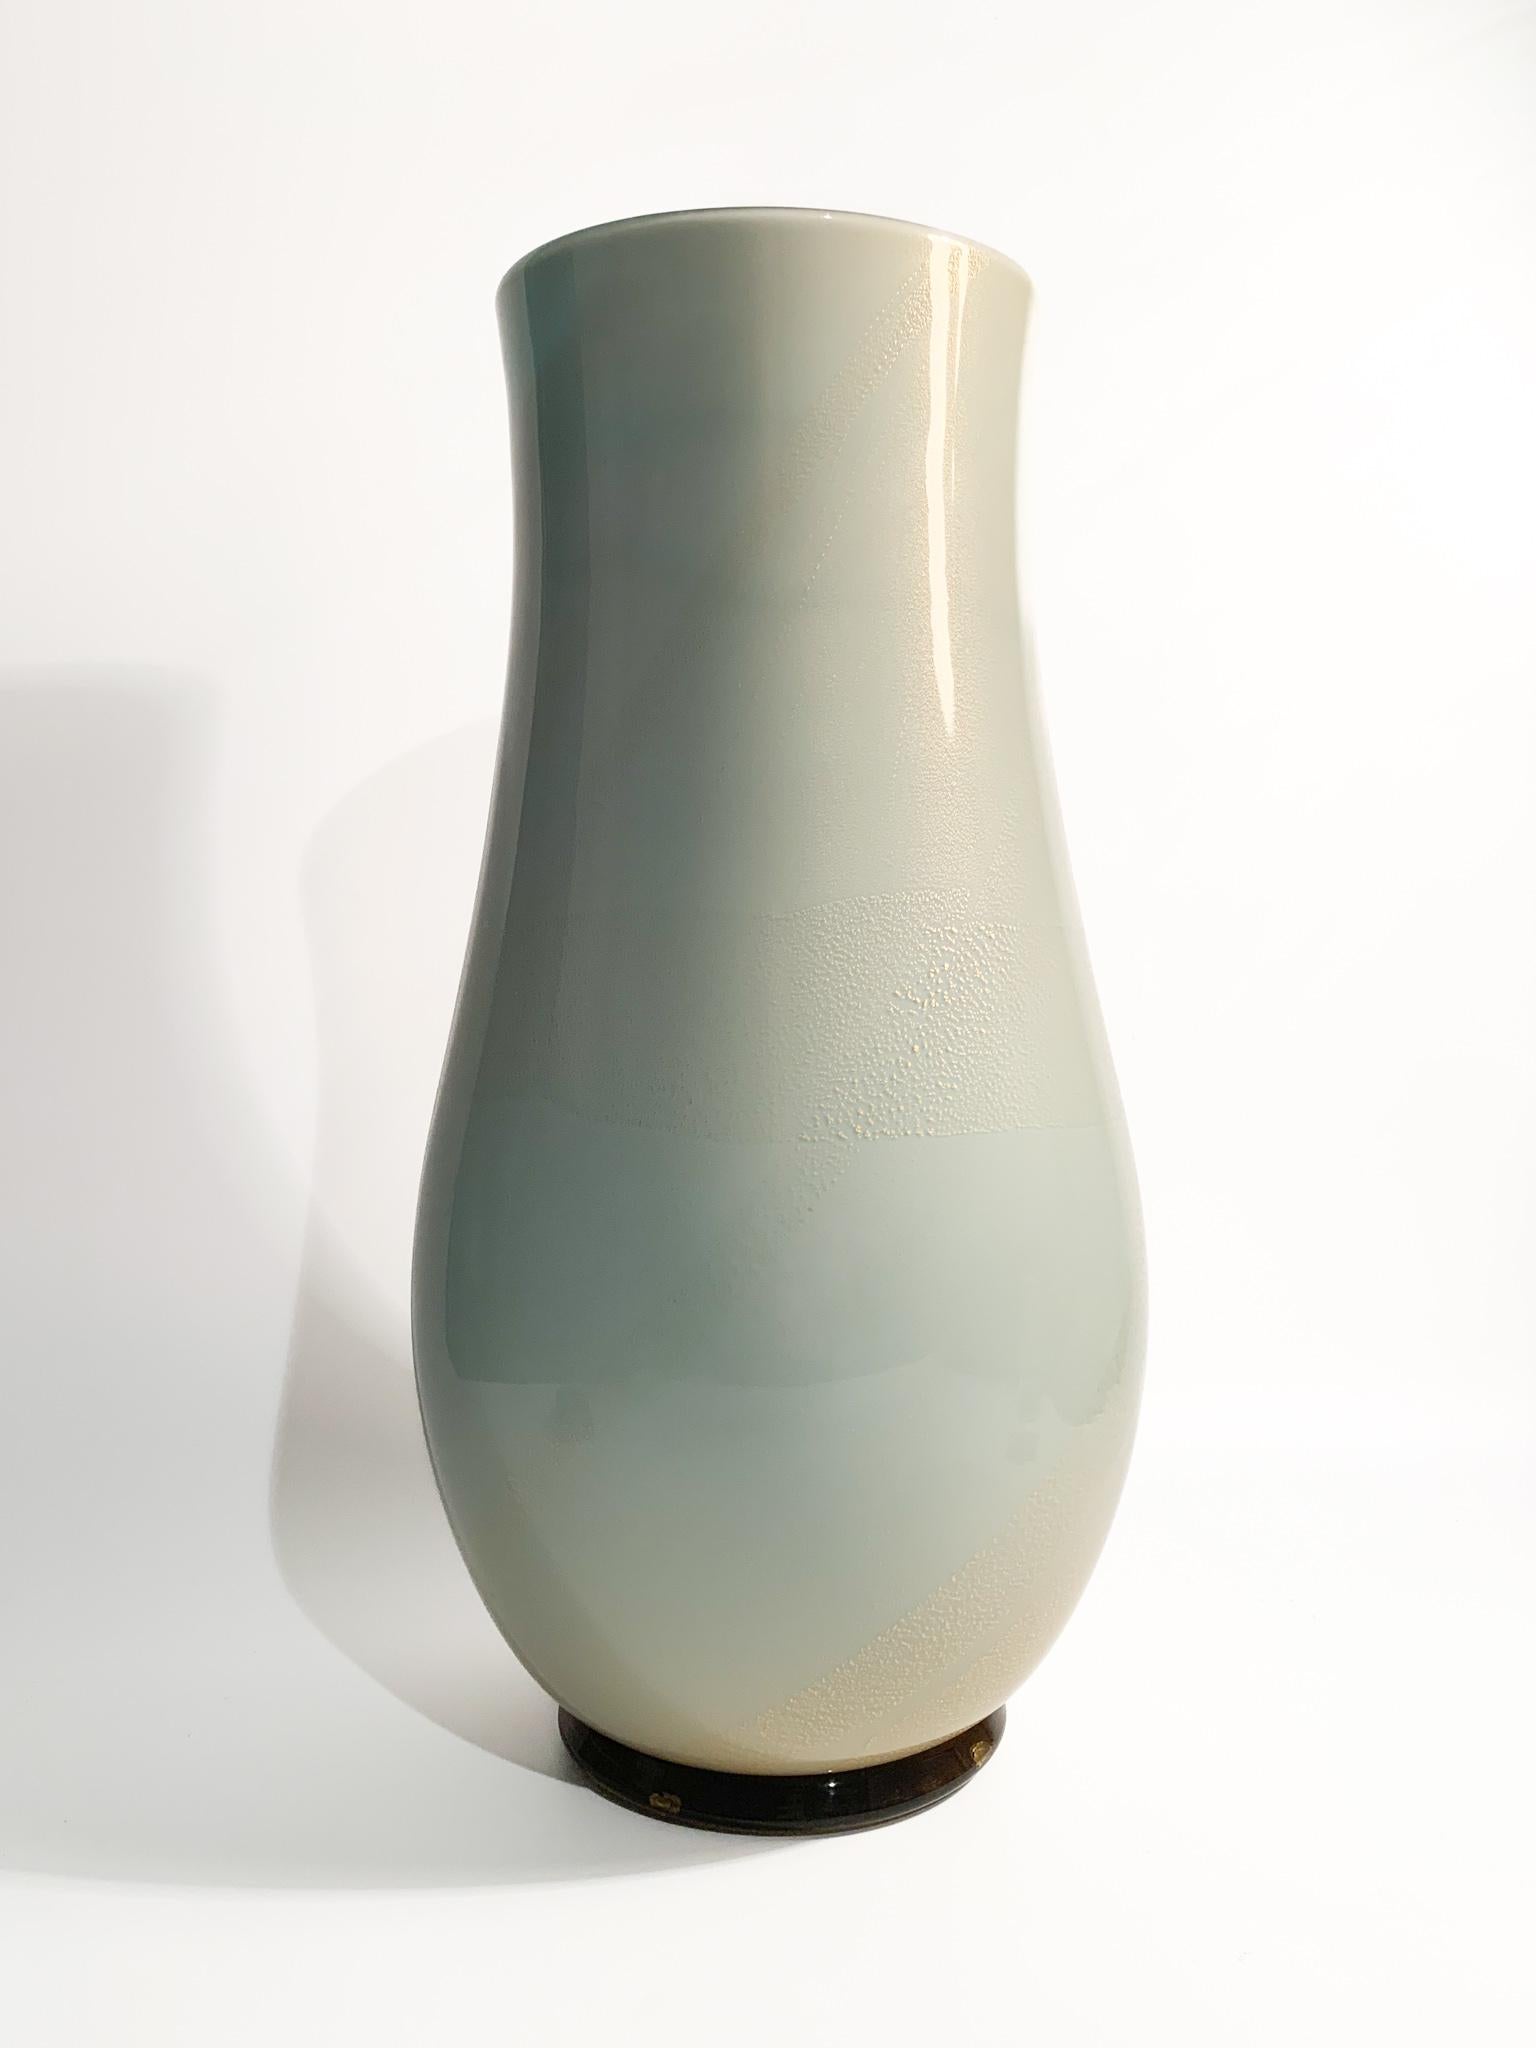 Vase in light blue Murano glass and gold leaf, made by Venini as a re-edition of the model designed by Tomaso Buzzi.

Ø 18 cm h 37 cm